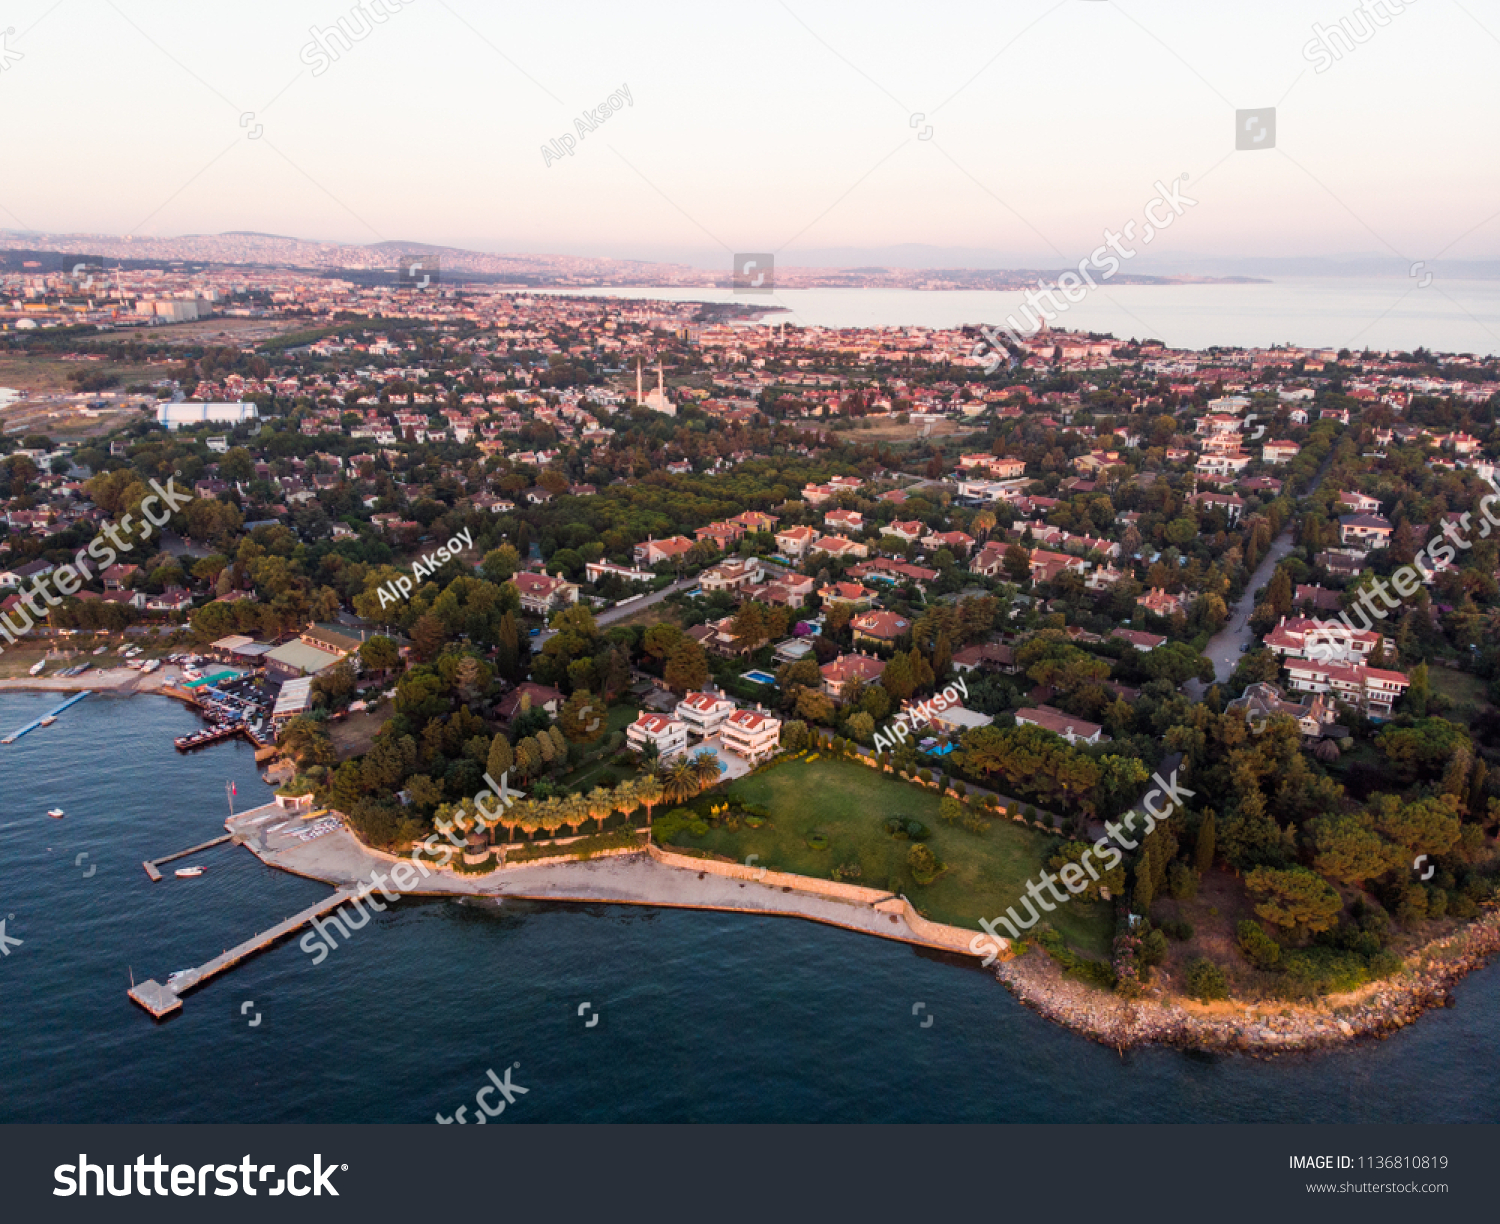 Aerial Drone View of Istanbul Tuzla Seaside at Golden Hour / Blue Hour #1136810819